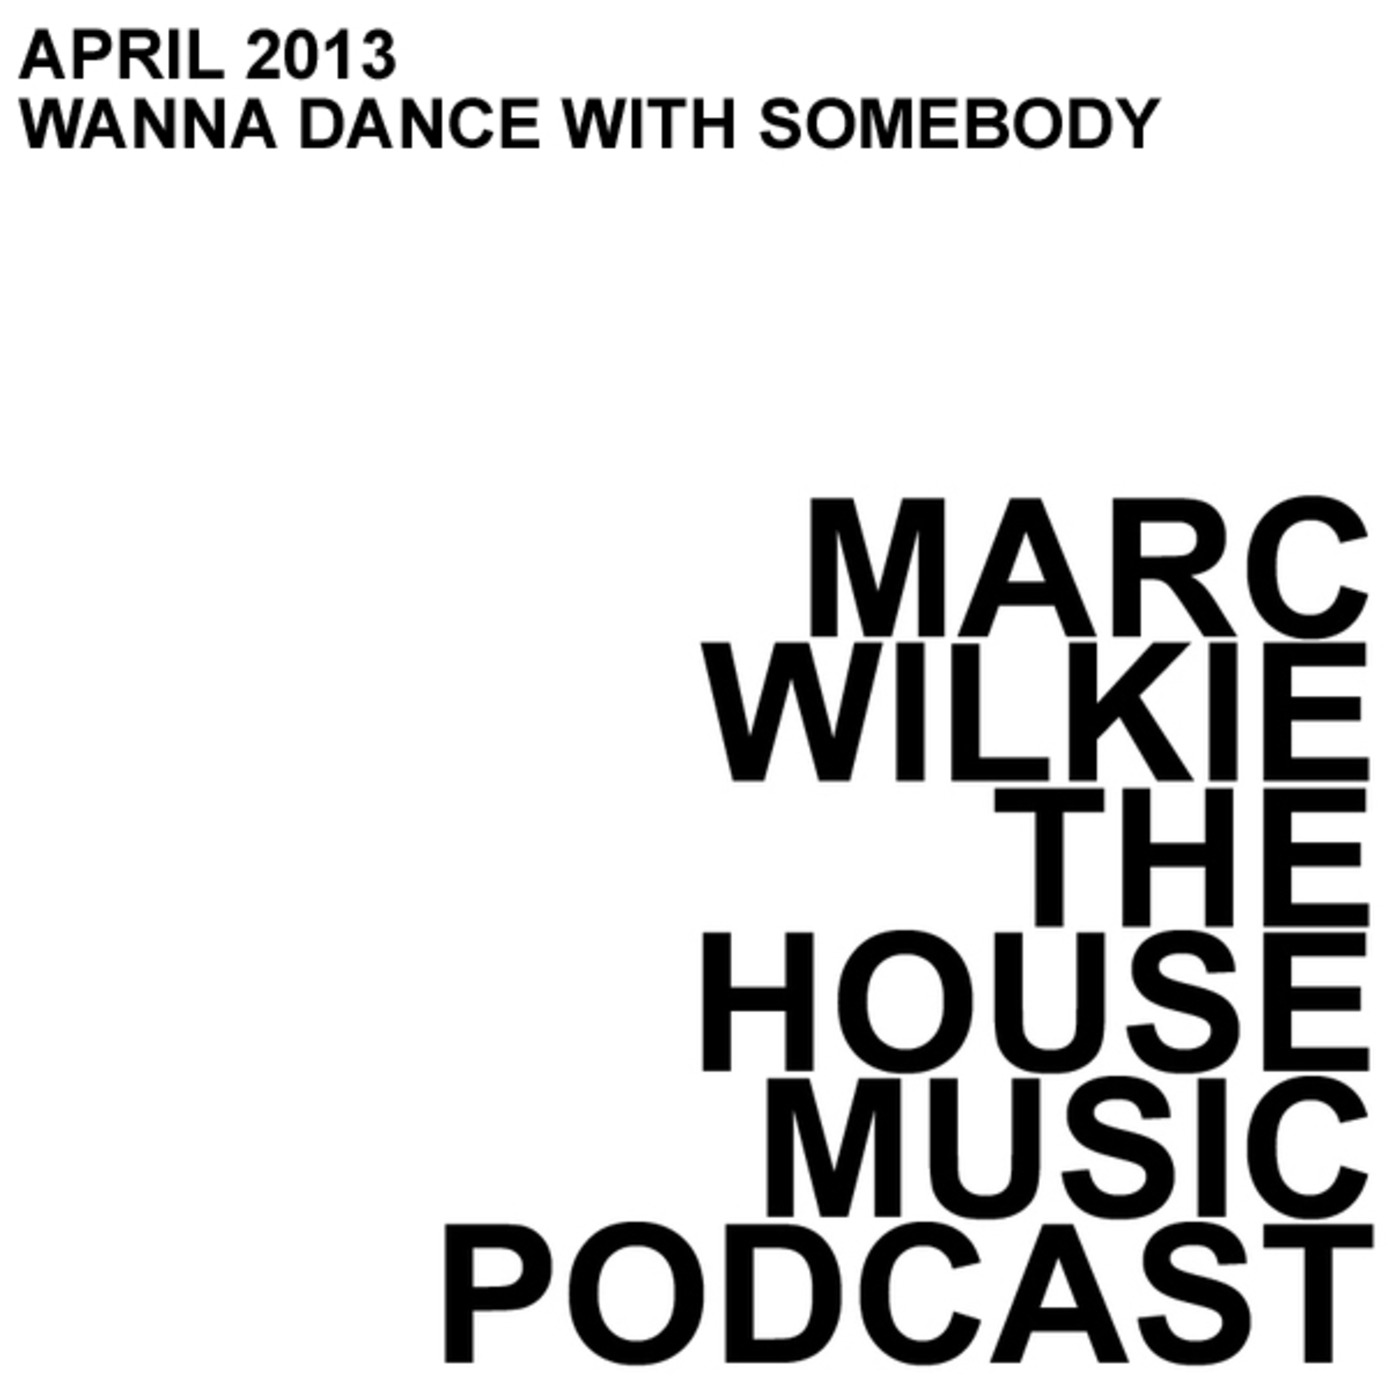 April 2013 - Wanna Dance With Somebody